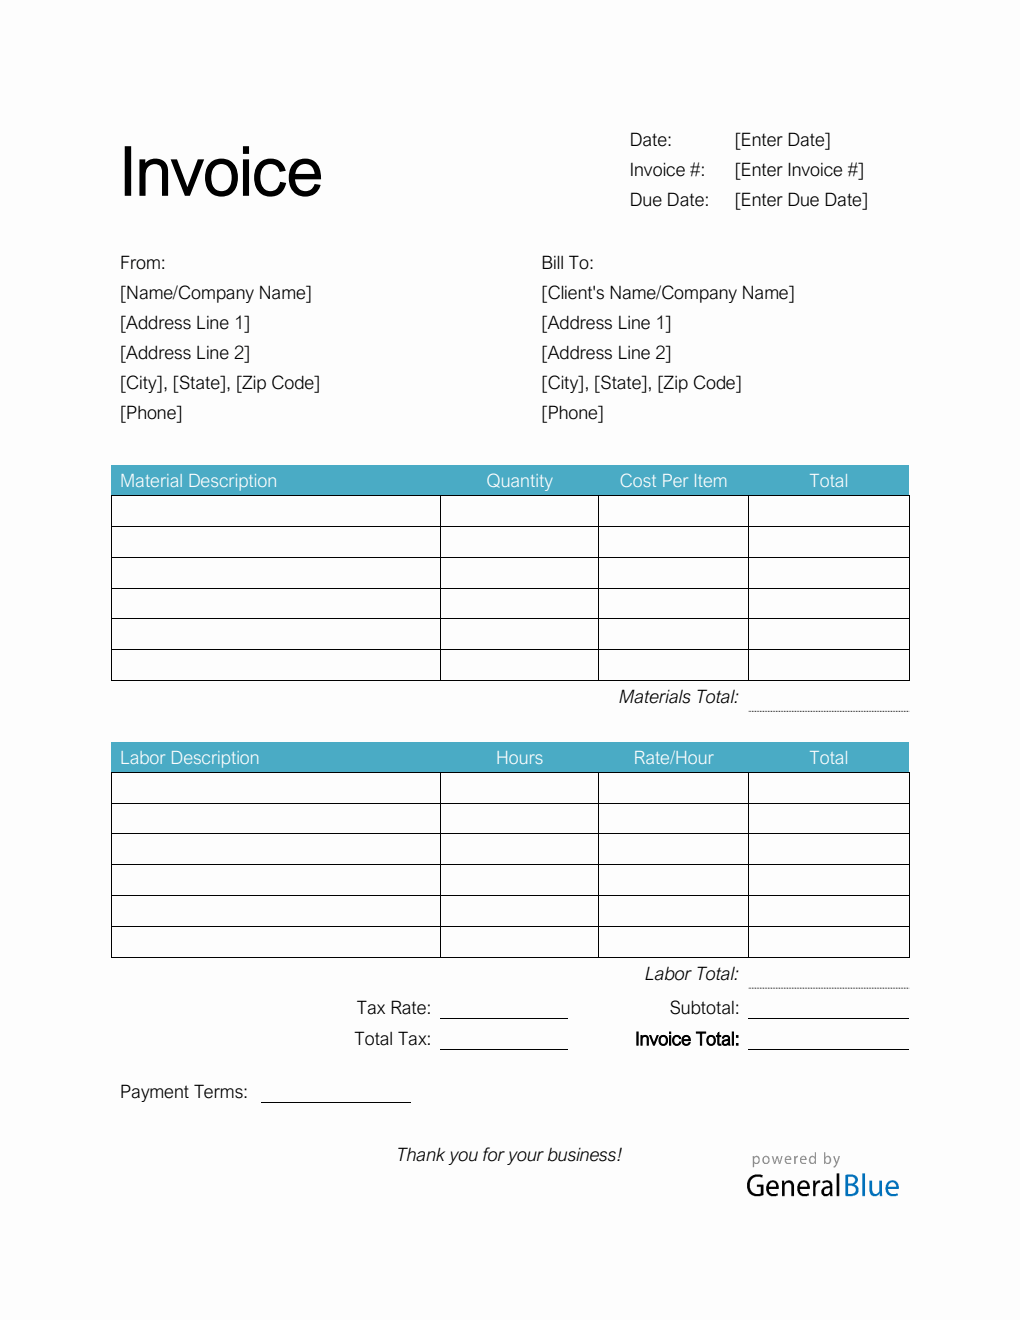 Time and Materials Invoice with Tax Calculation in Word (Basic)